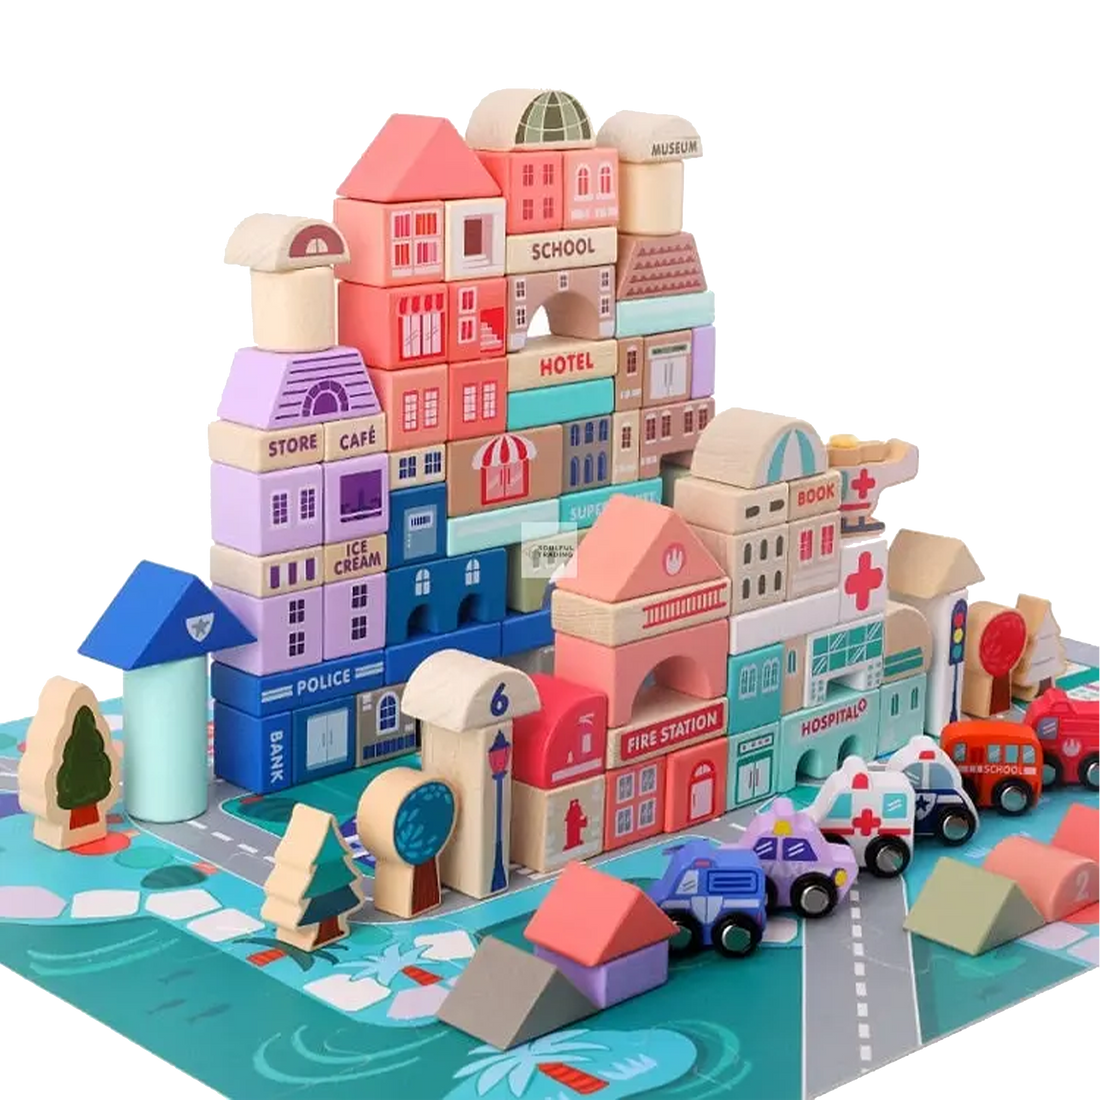 Colorful Soulful Trading Montessori large building blocks toy representing a toy town with structures labeled as school, hotel, cafe, and hospital, including small toy vehicles and trees, on a patterned mat.